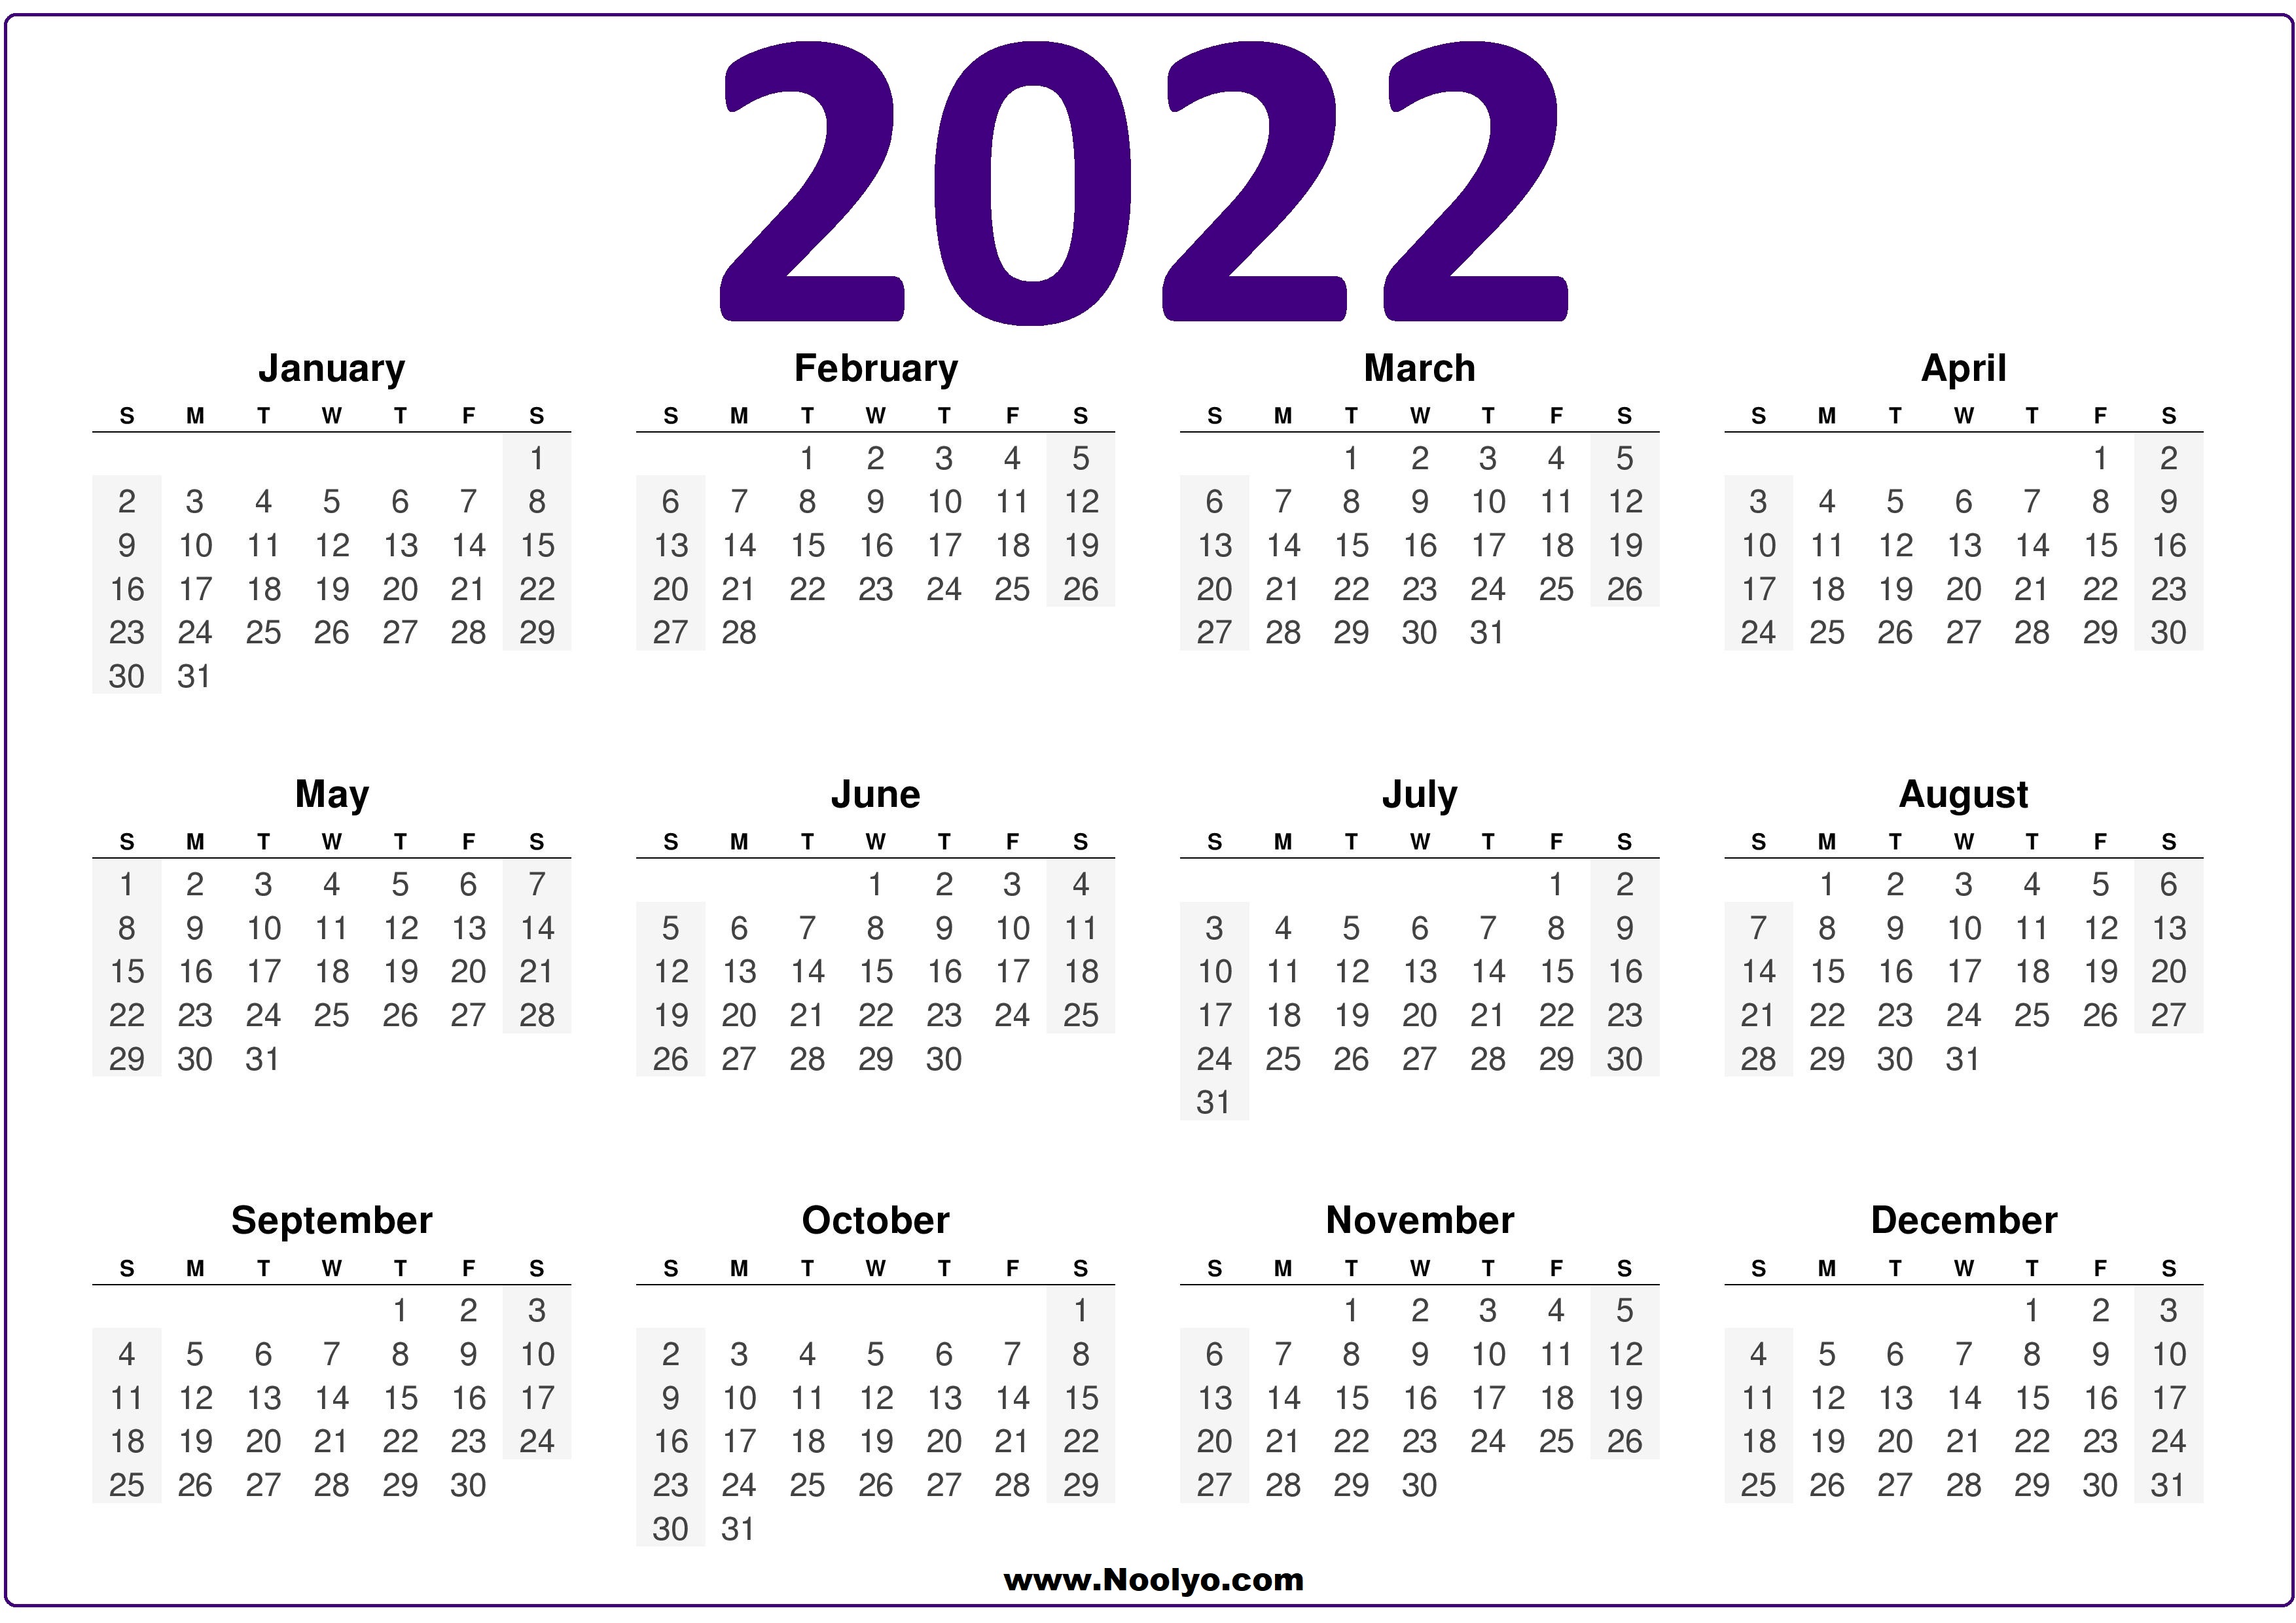 2022 Yearly Calendar United States - Free Download A4 Size. 